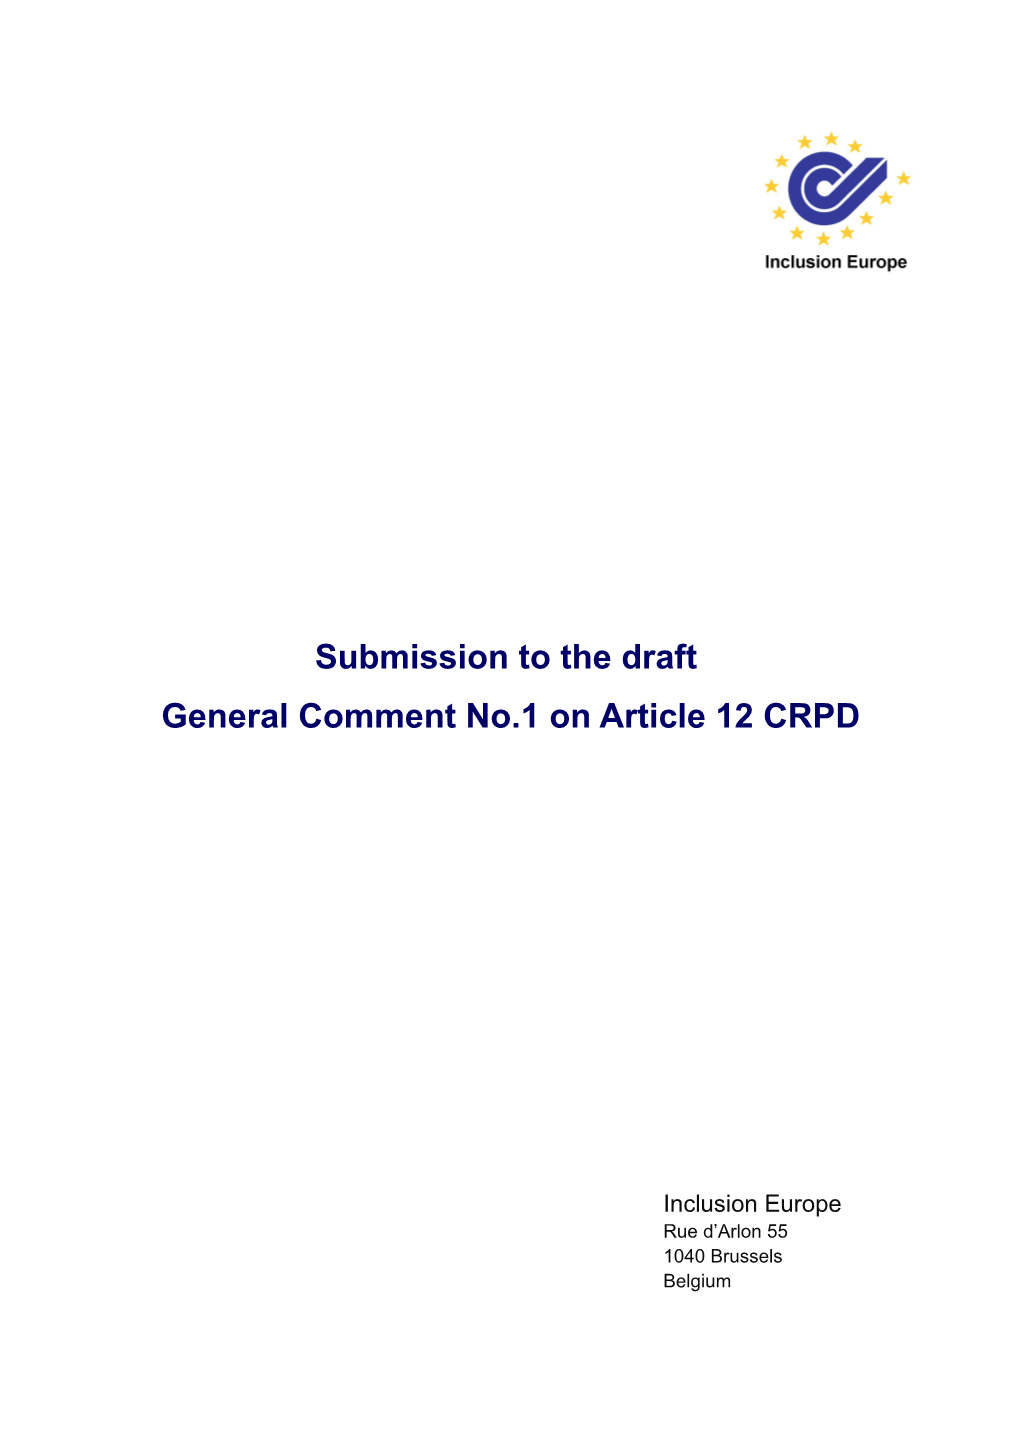 Submission to the Draft General Comment No.1 on Article 12 UNCRPD